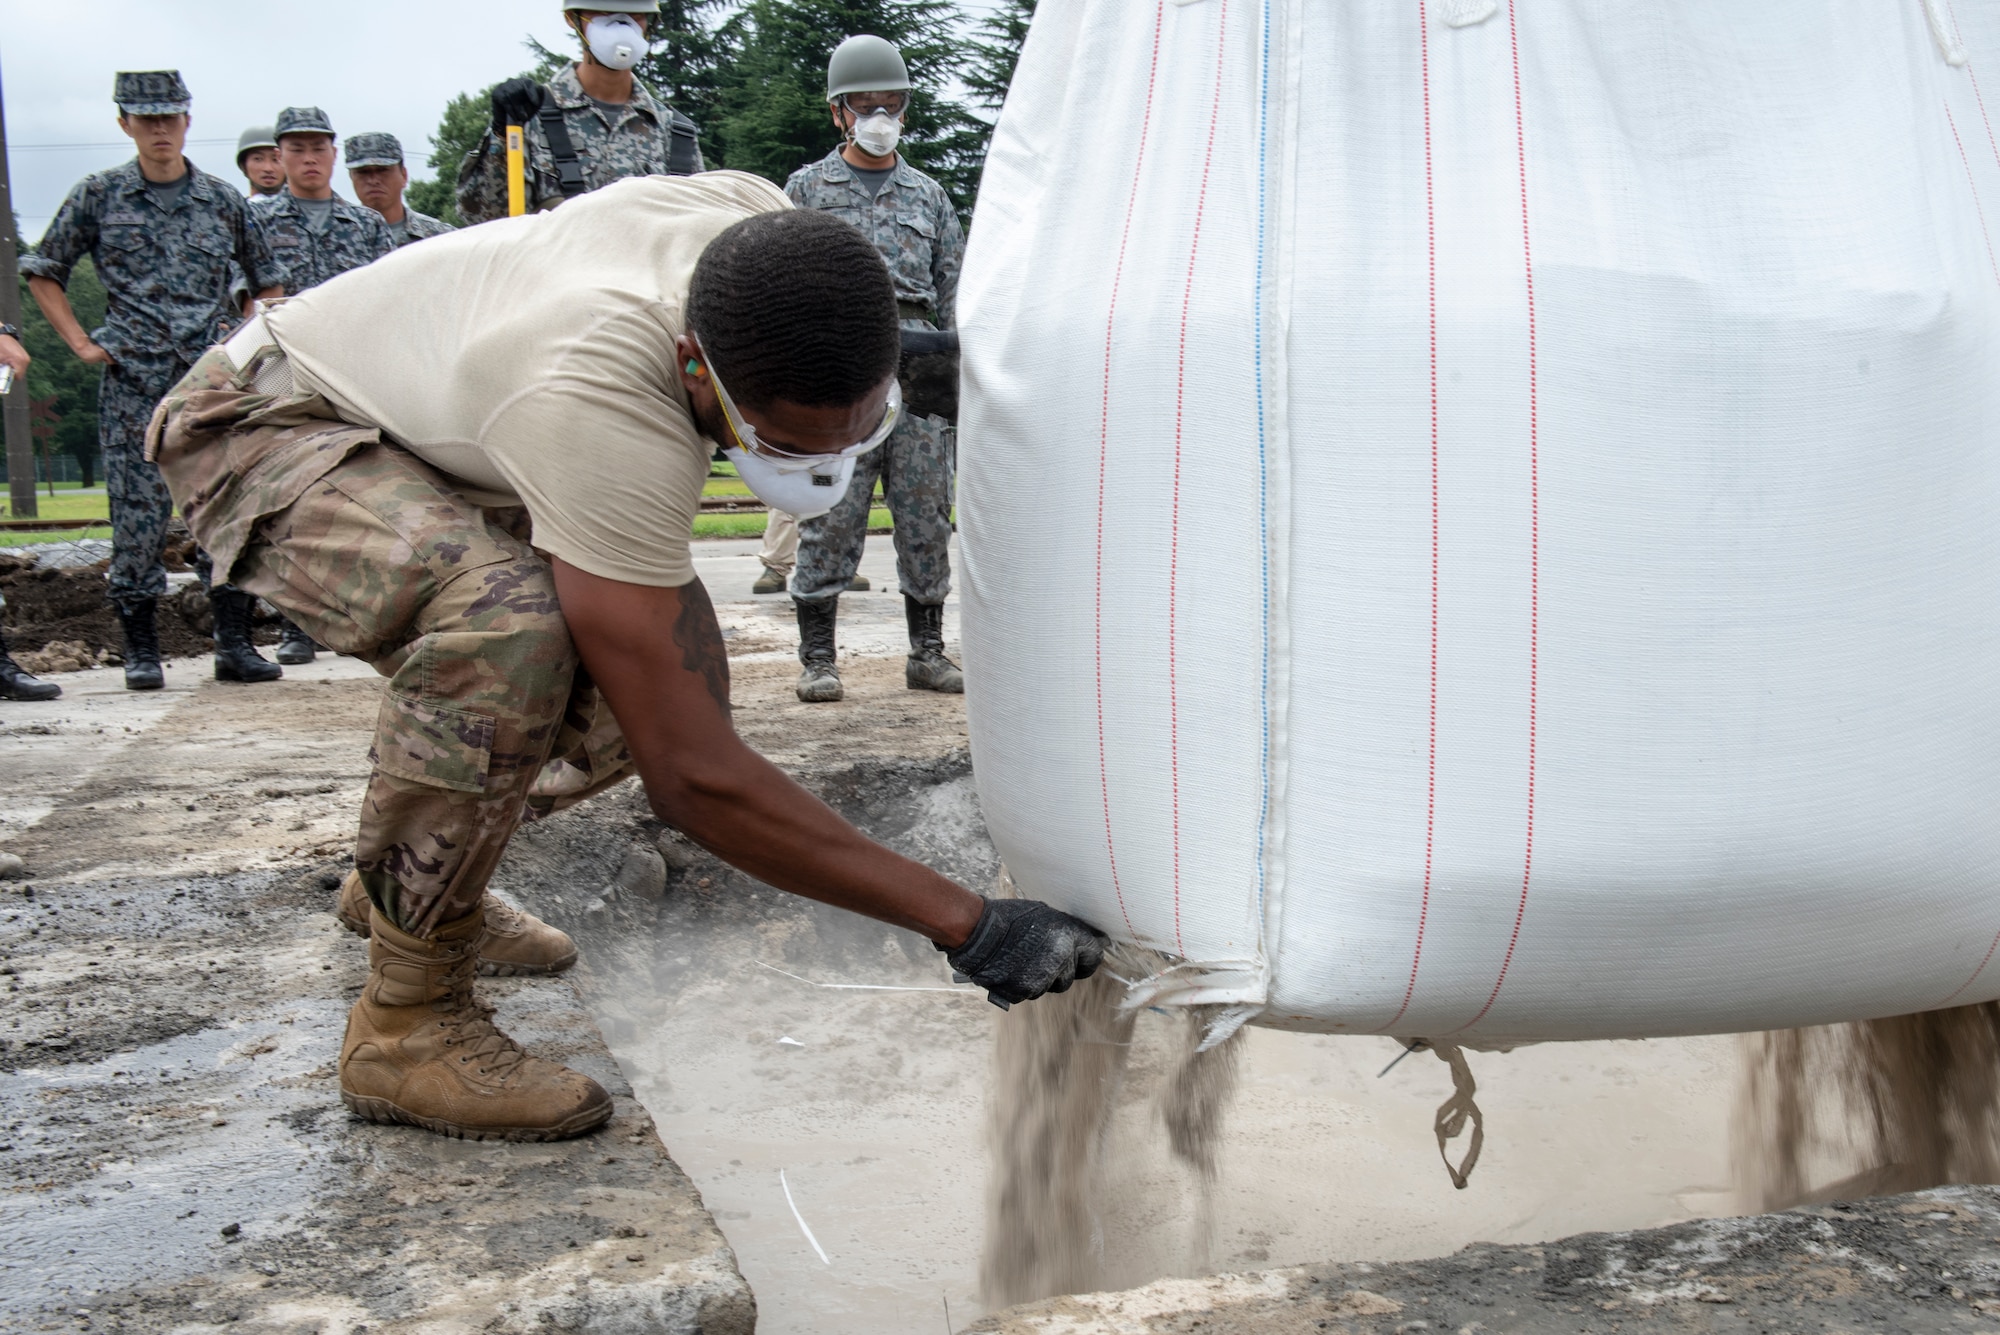 Staff Sgt. Shannon Anderson, 51st Civil Engineer Squadron electrical systems craftsman out of Osan Air Base, Republic of Korea, cuts open a bag of flow able fill rapid set concrete to be mixed with water to complete the backfill portion of rapid airfield damage repair (RADR) during Pacific Unity 2019 at Yokota Air Base, Japan, August 22, 2019.